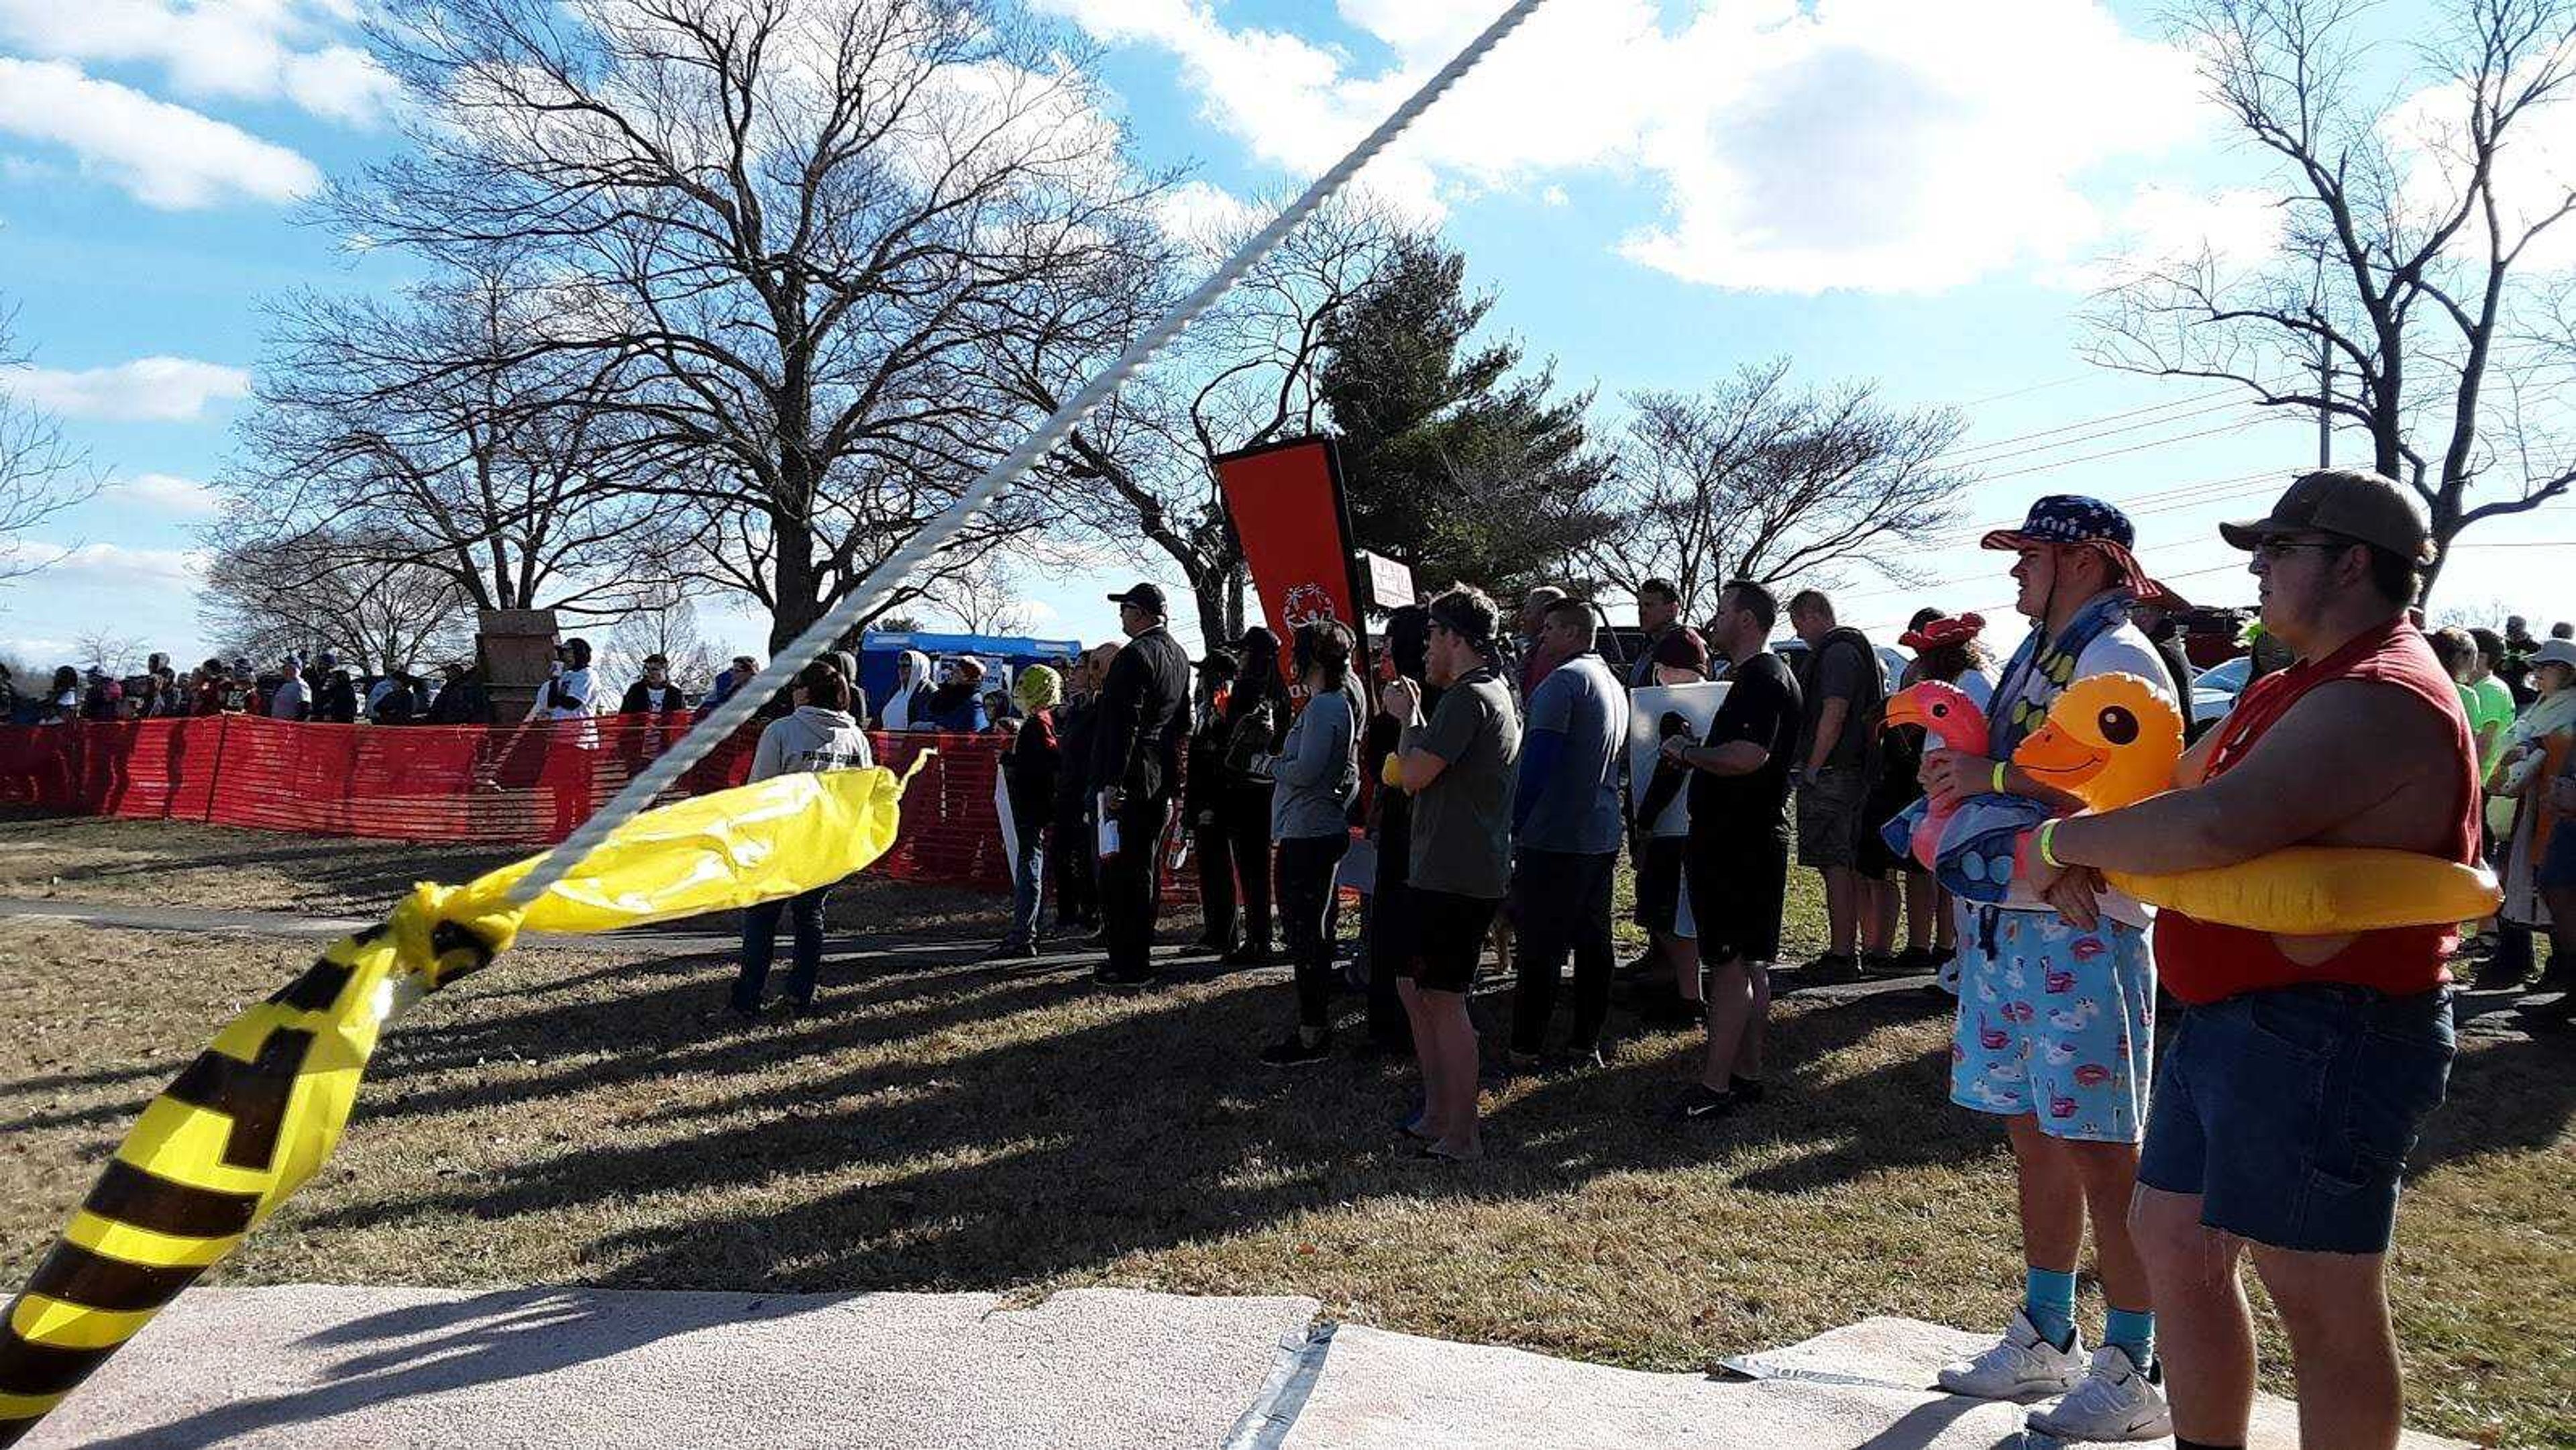 Polar Plunge volunteers go all-in for Special Olympics with first year in new location